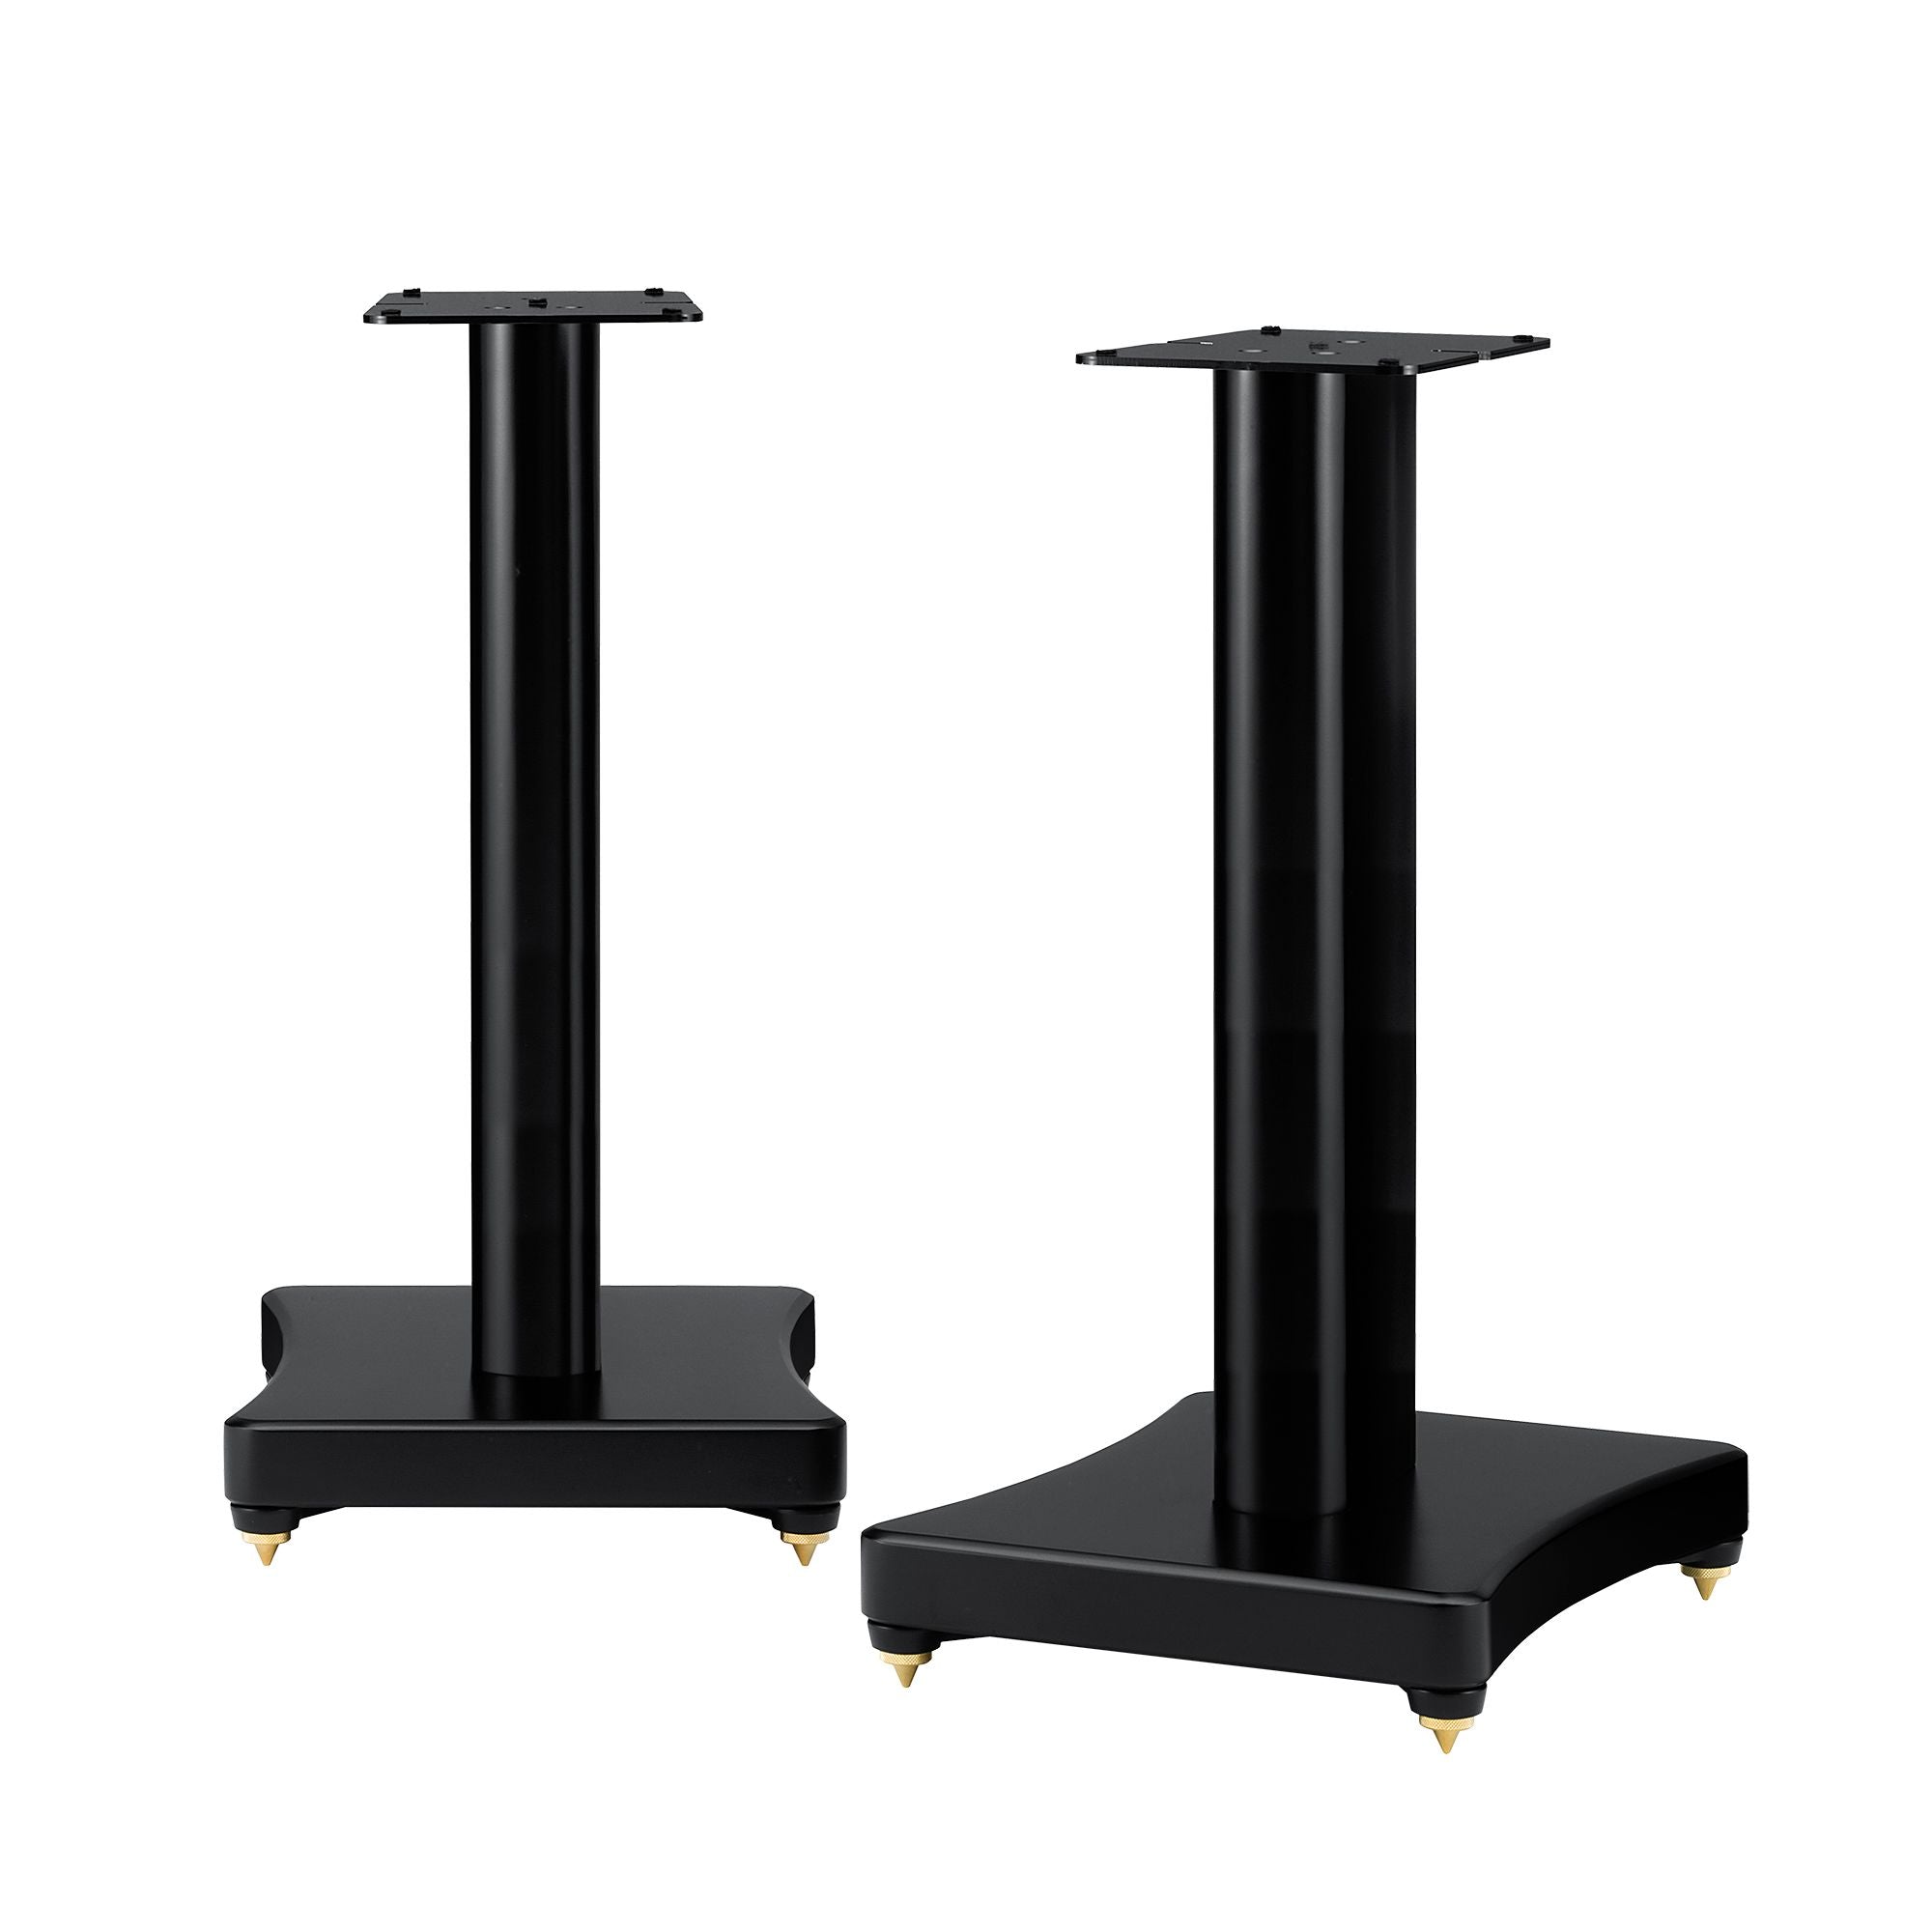 YAMAHA SPS-800A SPEAKER STAND (PAIR)